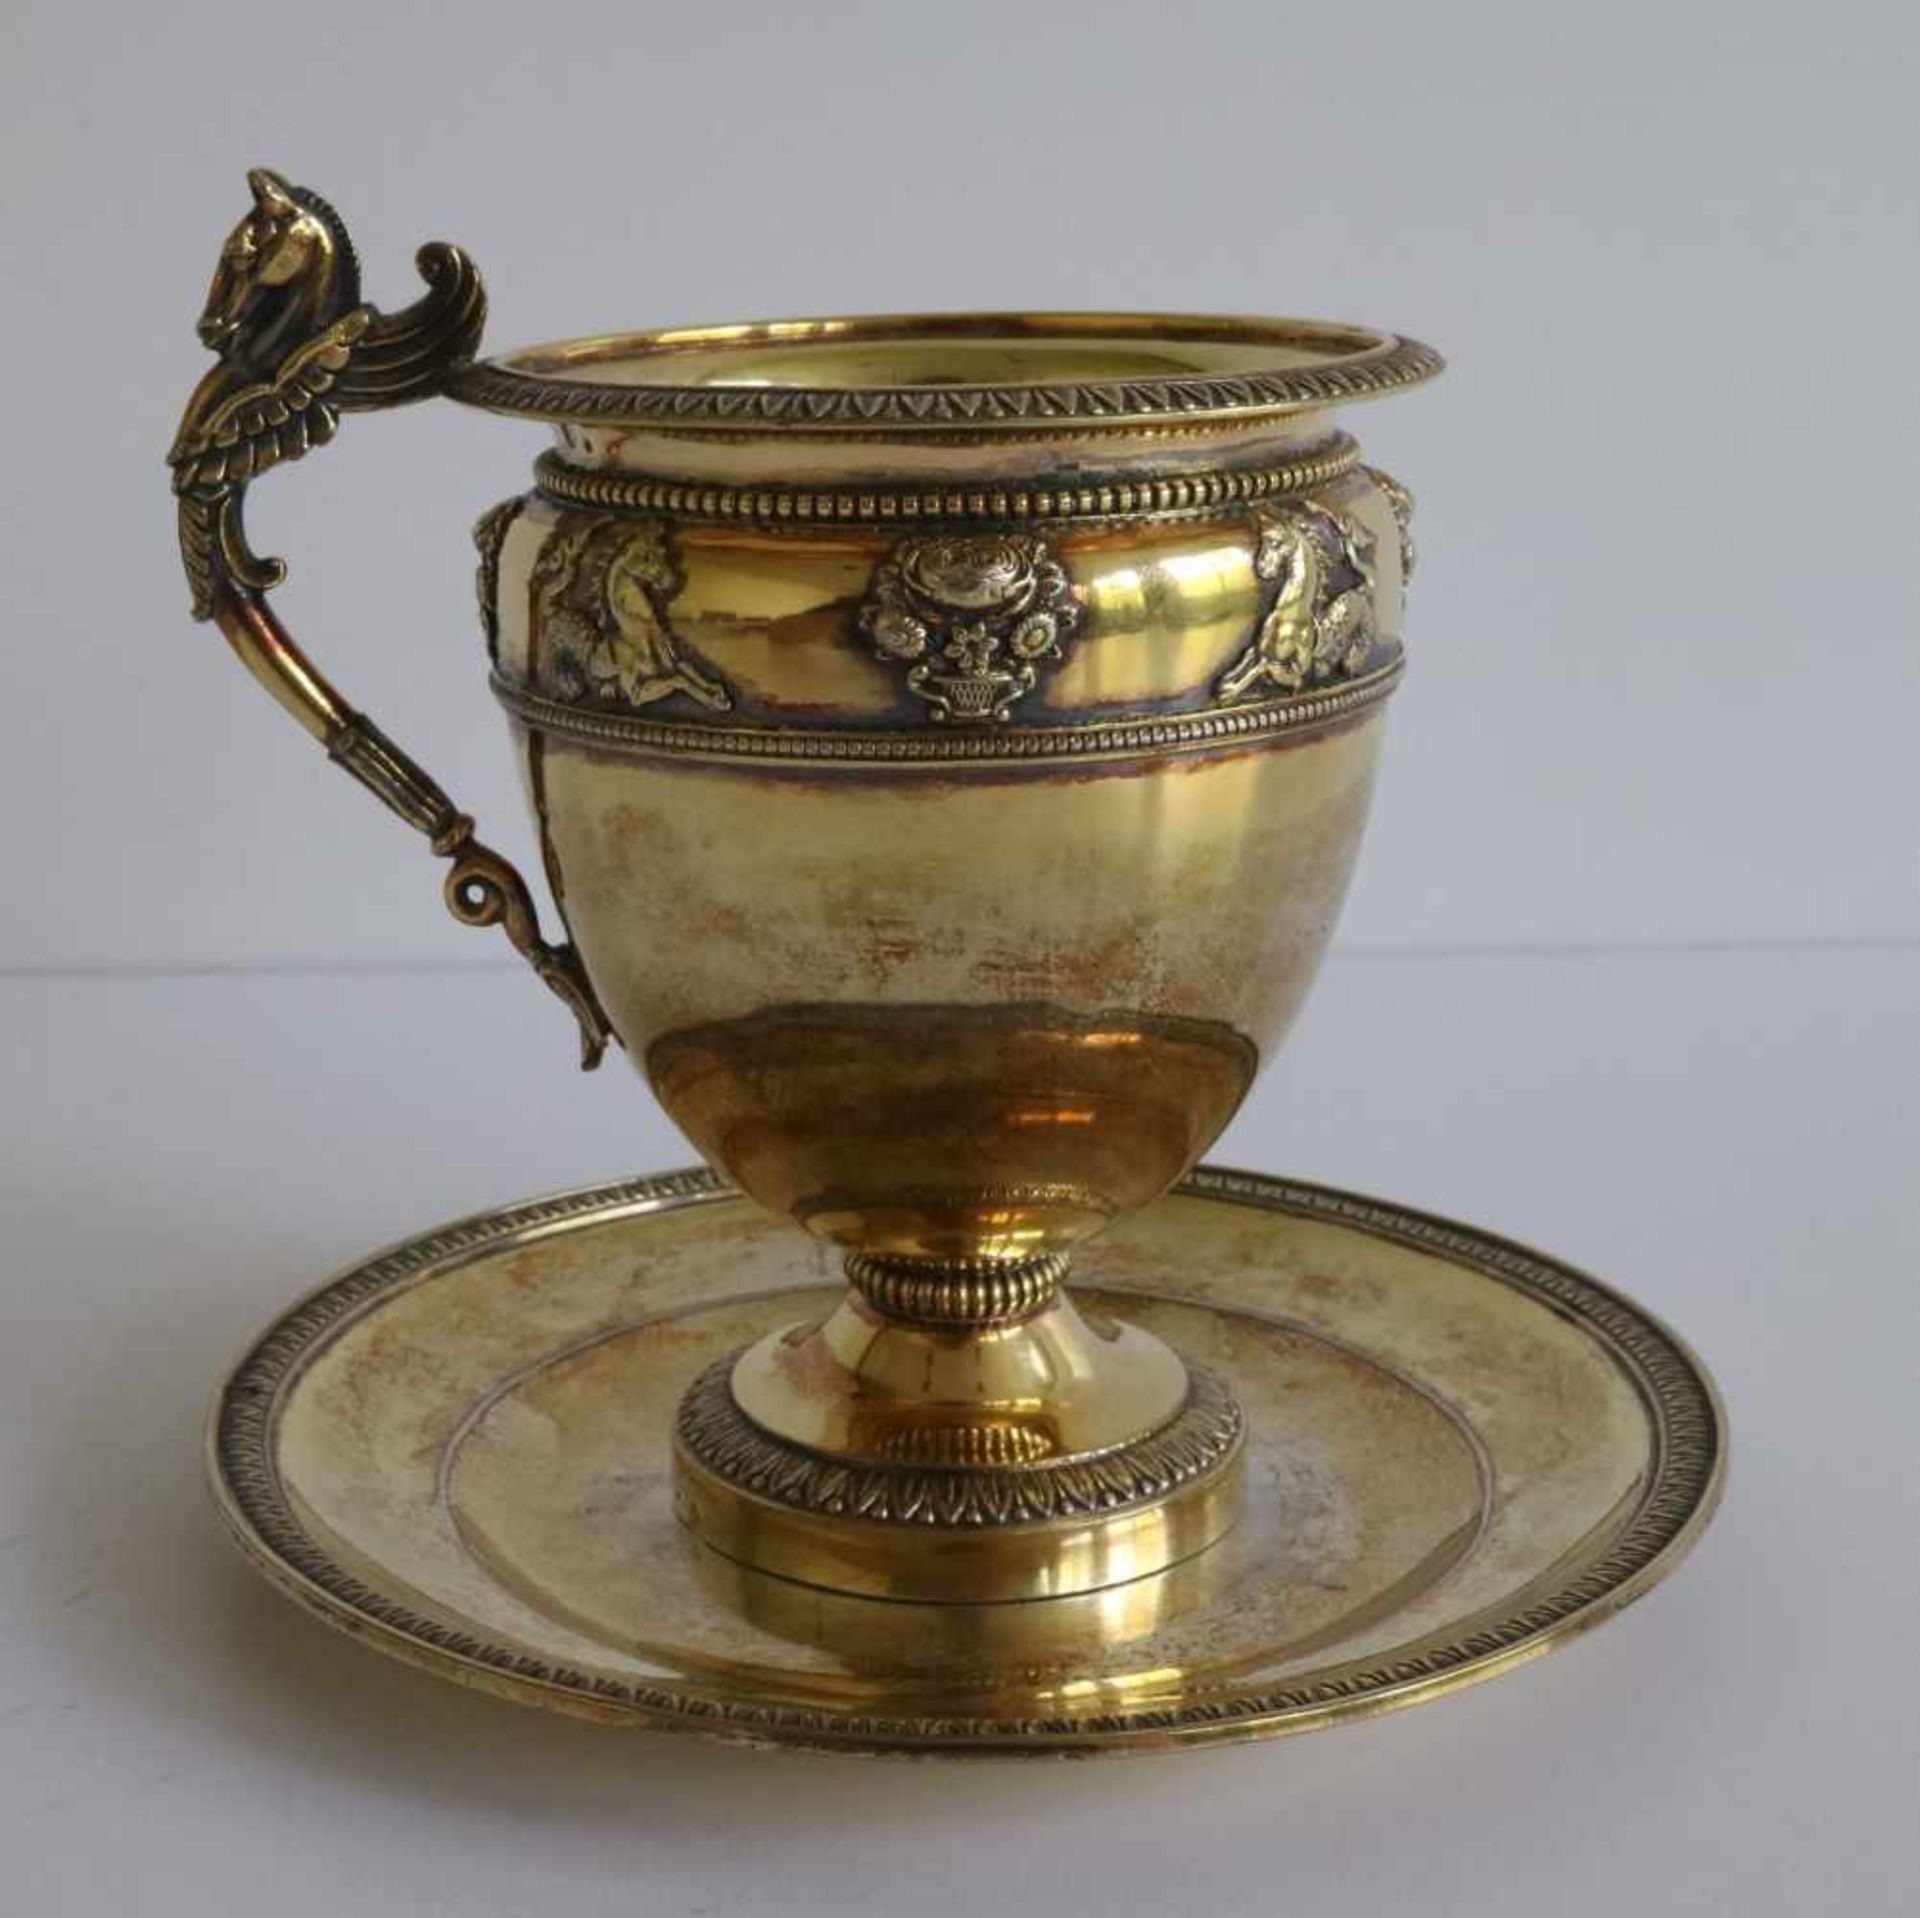 Chocolate cup with saucer silver with vermeille, Paris 1818 - 1838, 293 grams H 12 dia 13,5 cm - Image 3 of 6